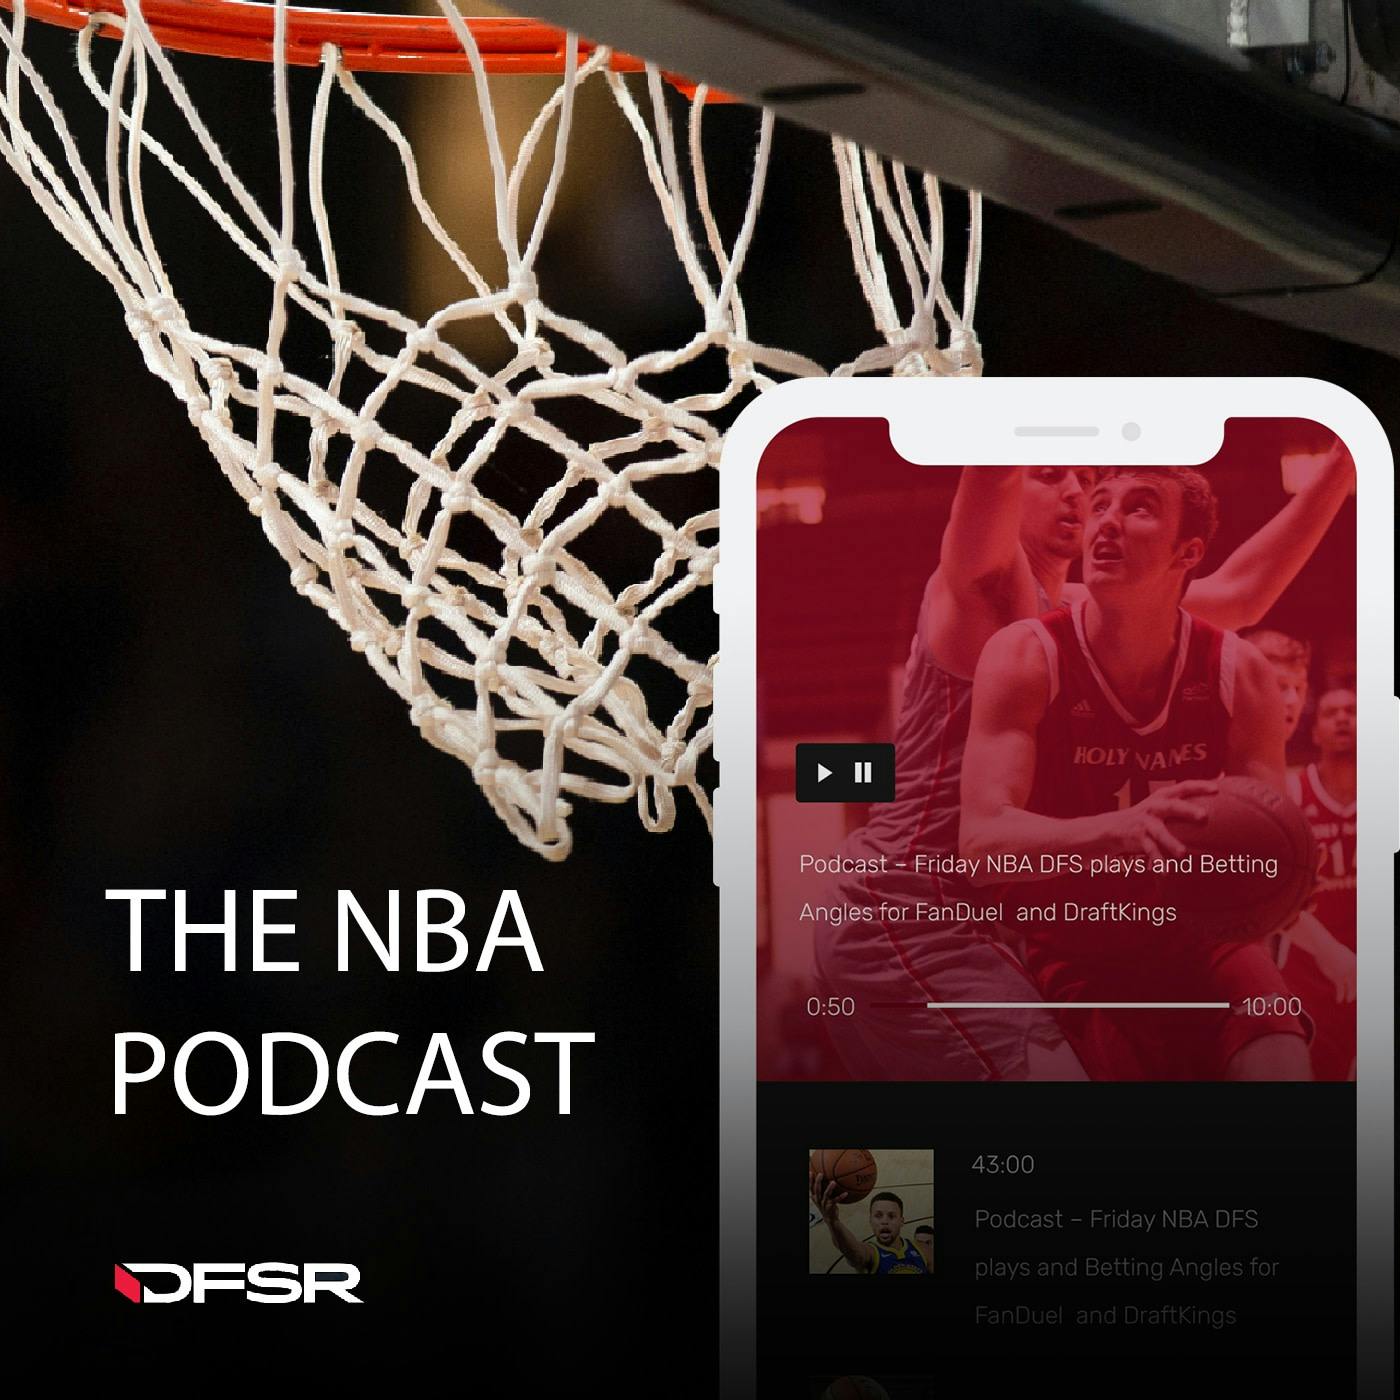 DFS NBA Podcast for FanDuel and DraftKings - Friday 11/30/18